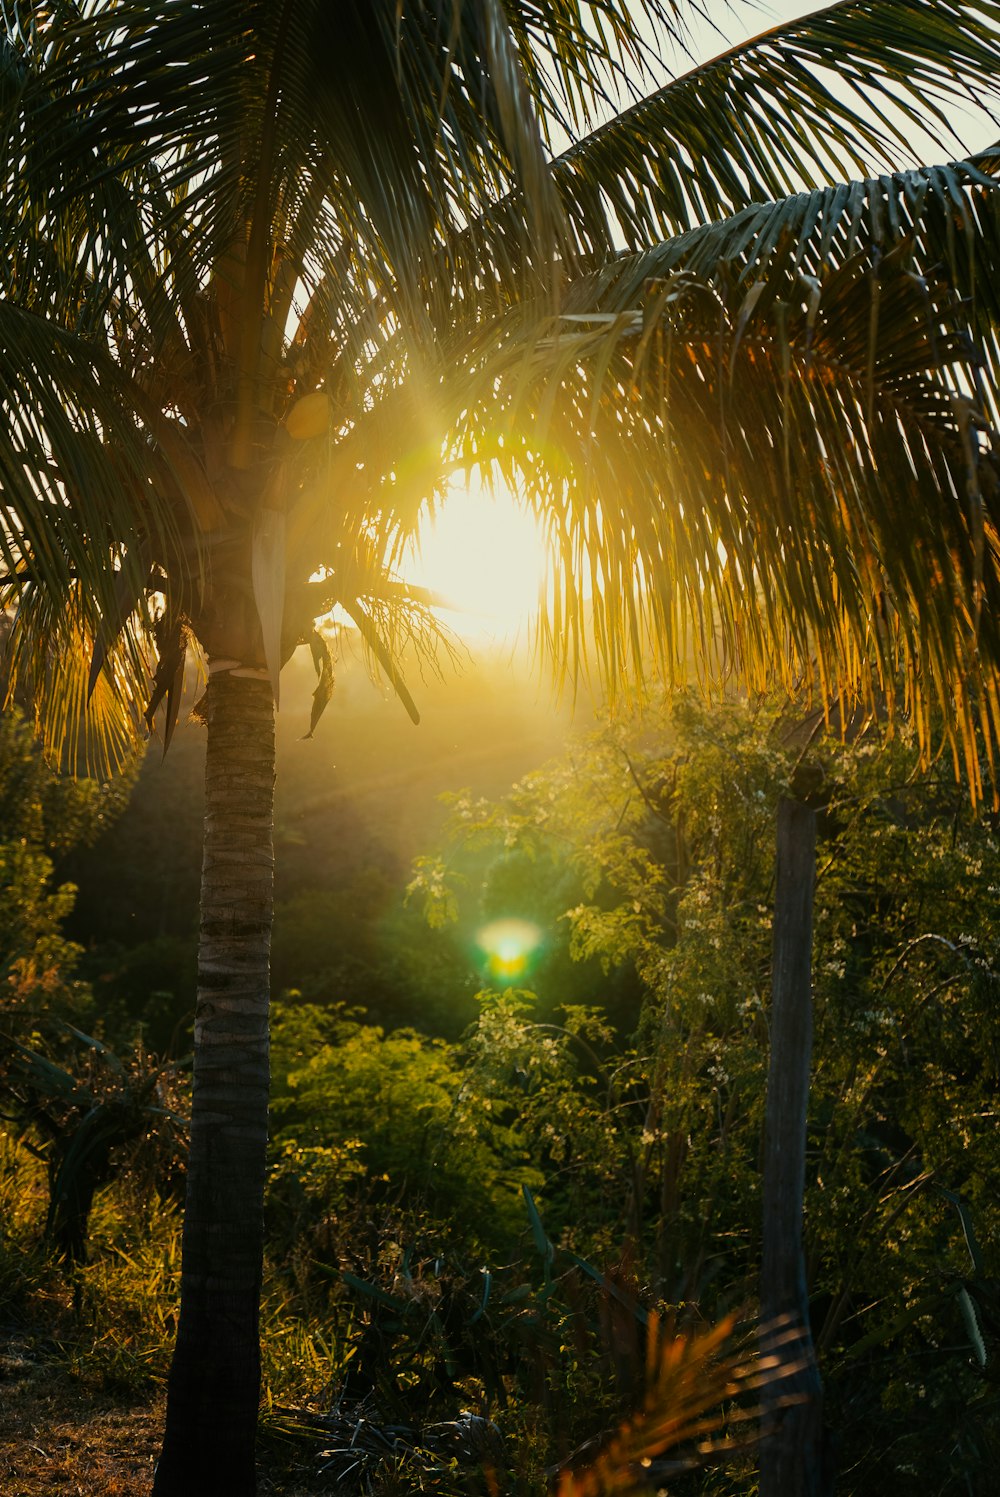 the sun is shining through the trees in the jungle